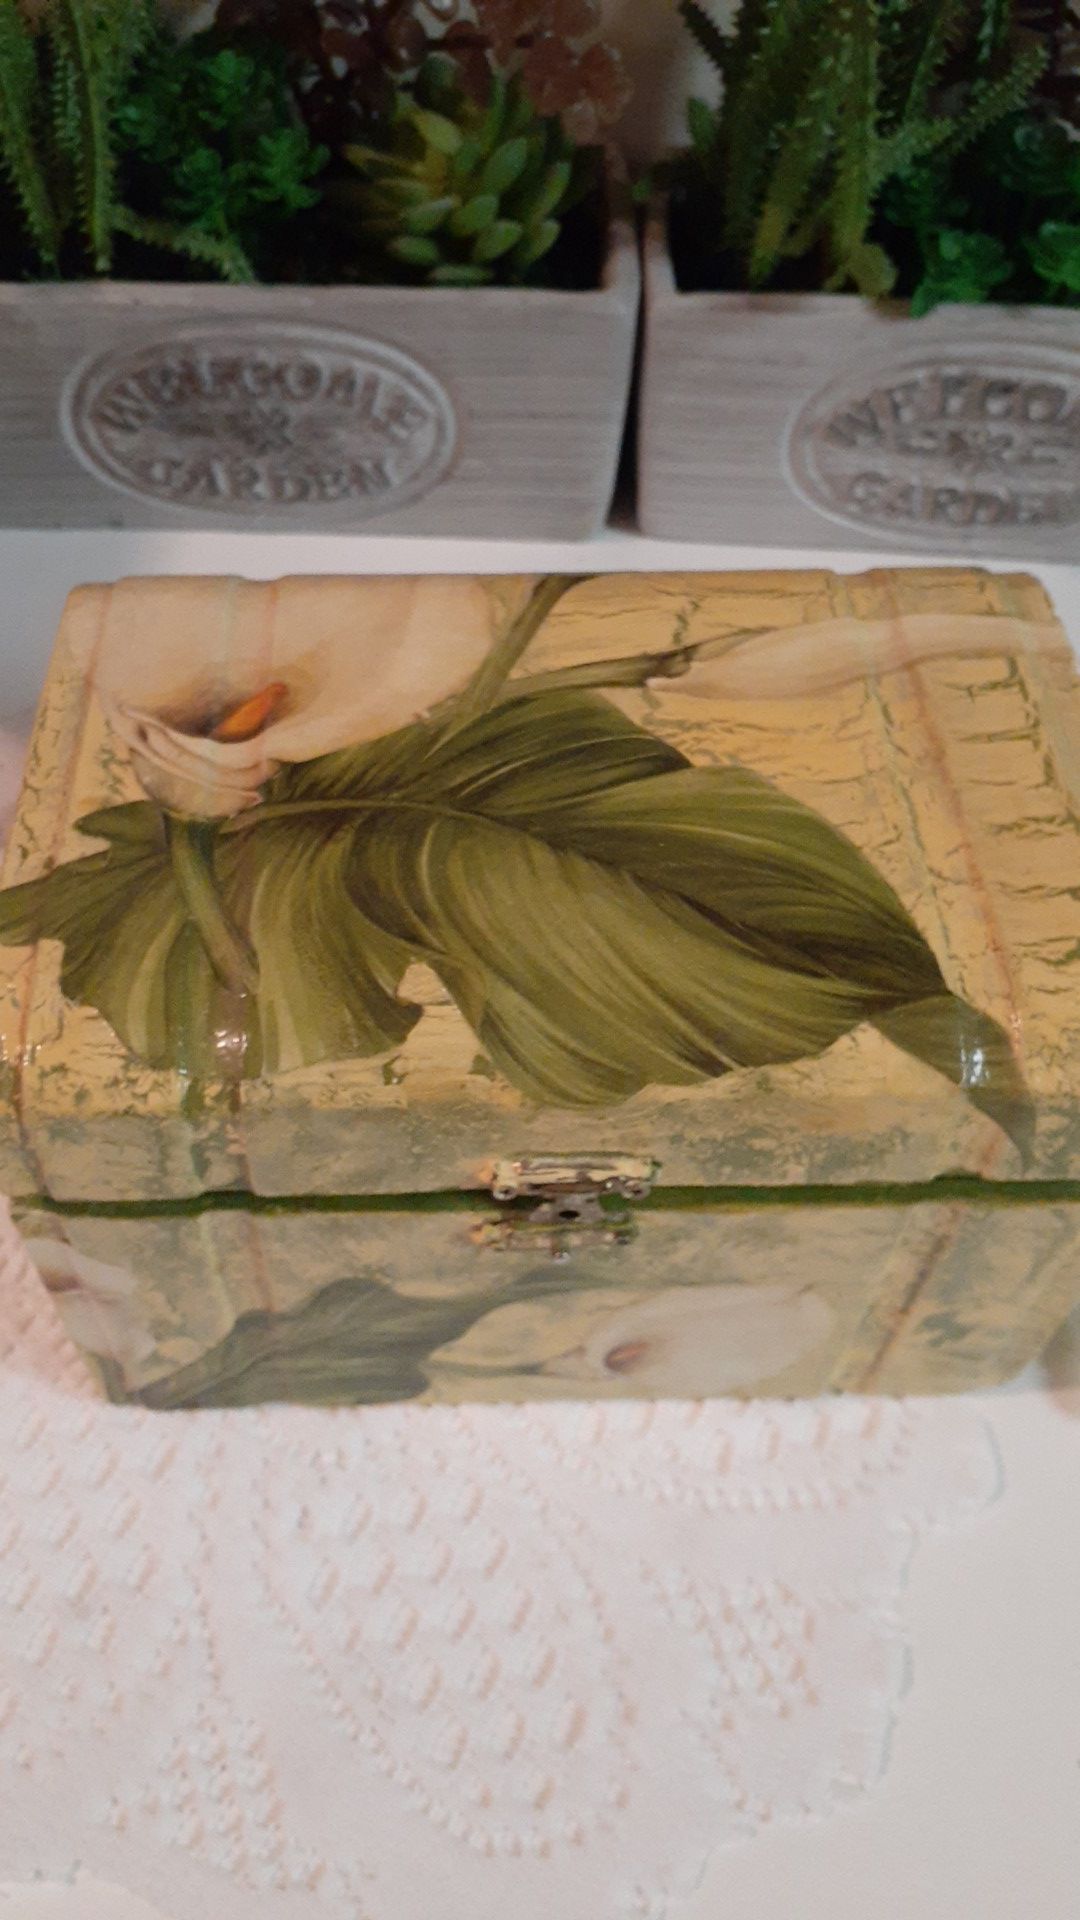 Small box with flowers